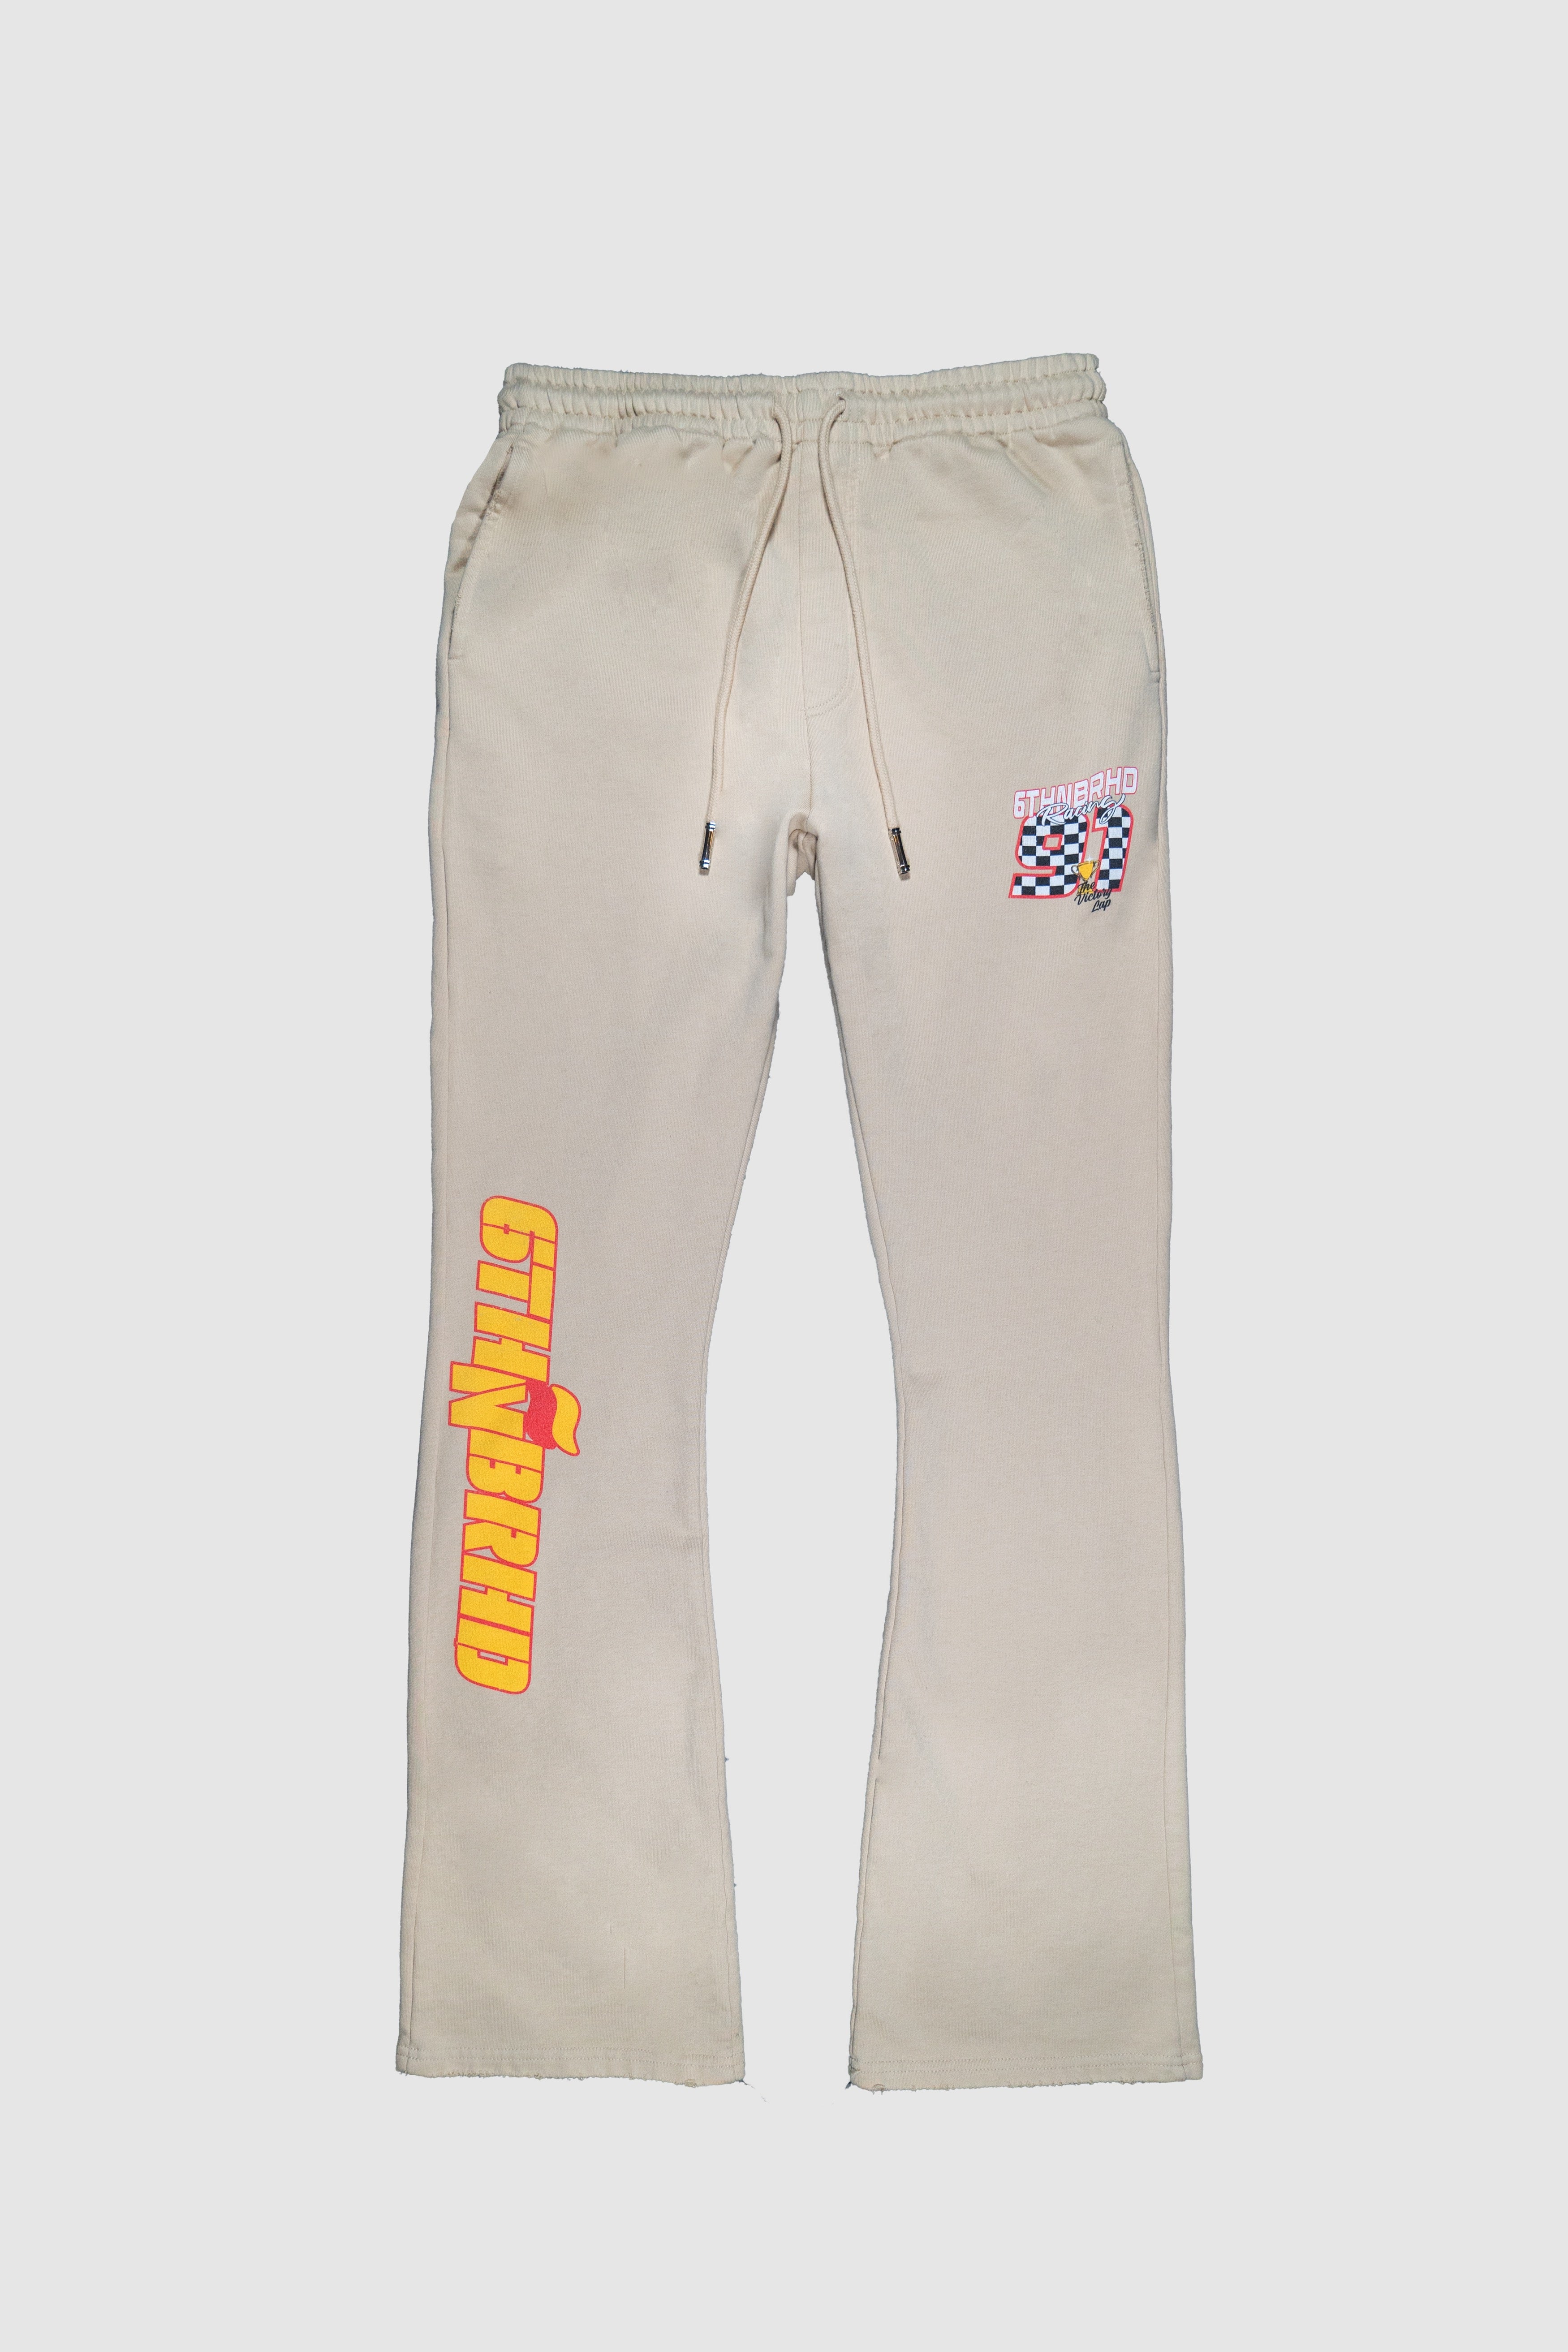 6thNBRHD STACKED PANTS "PIT STOP" CREAM